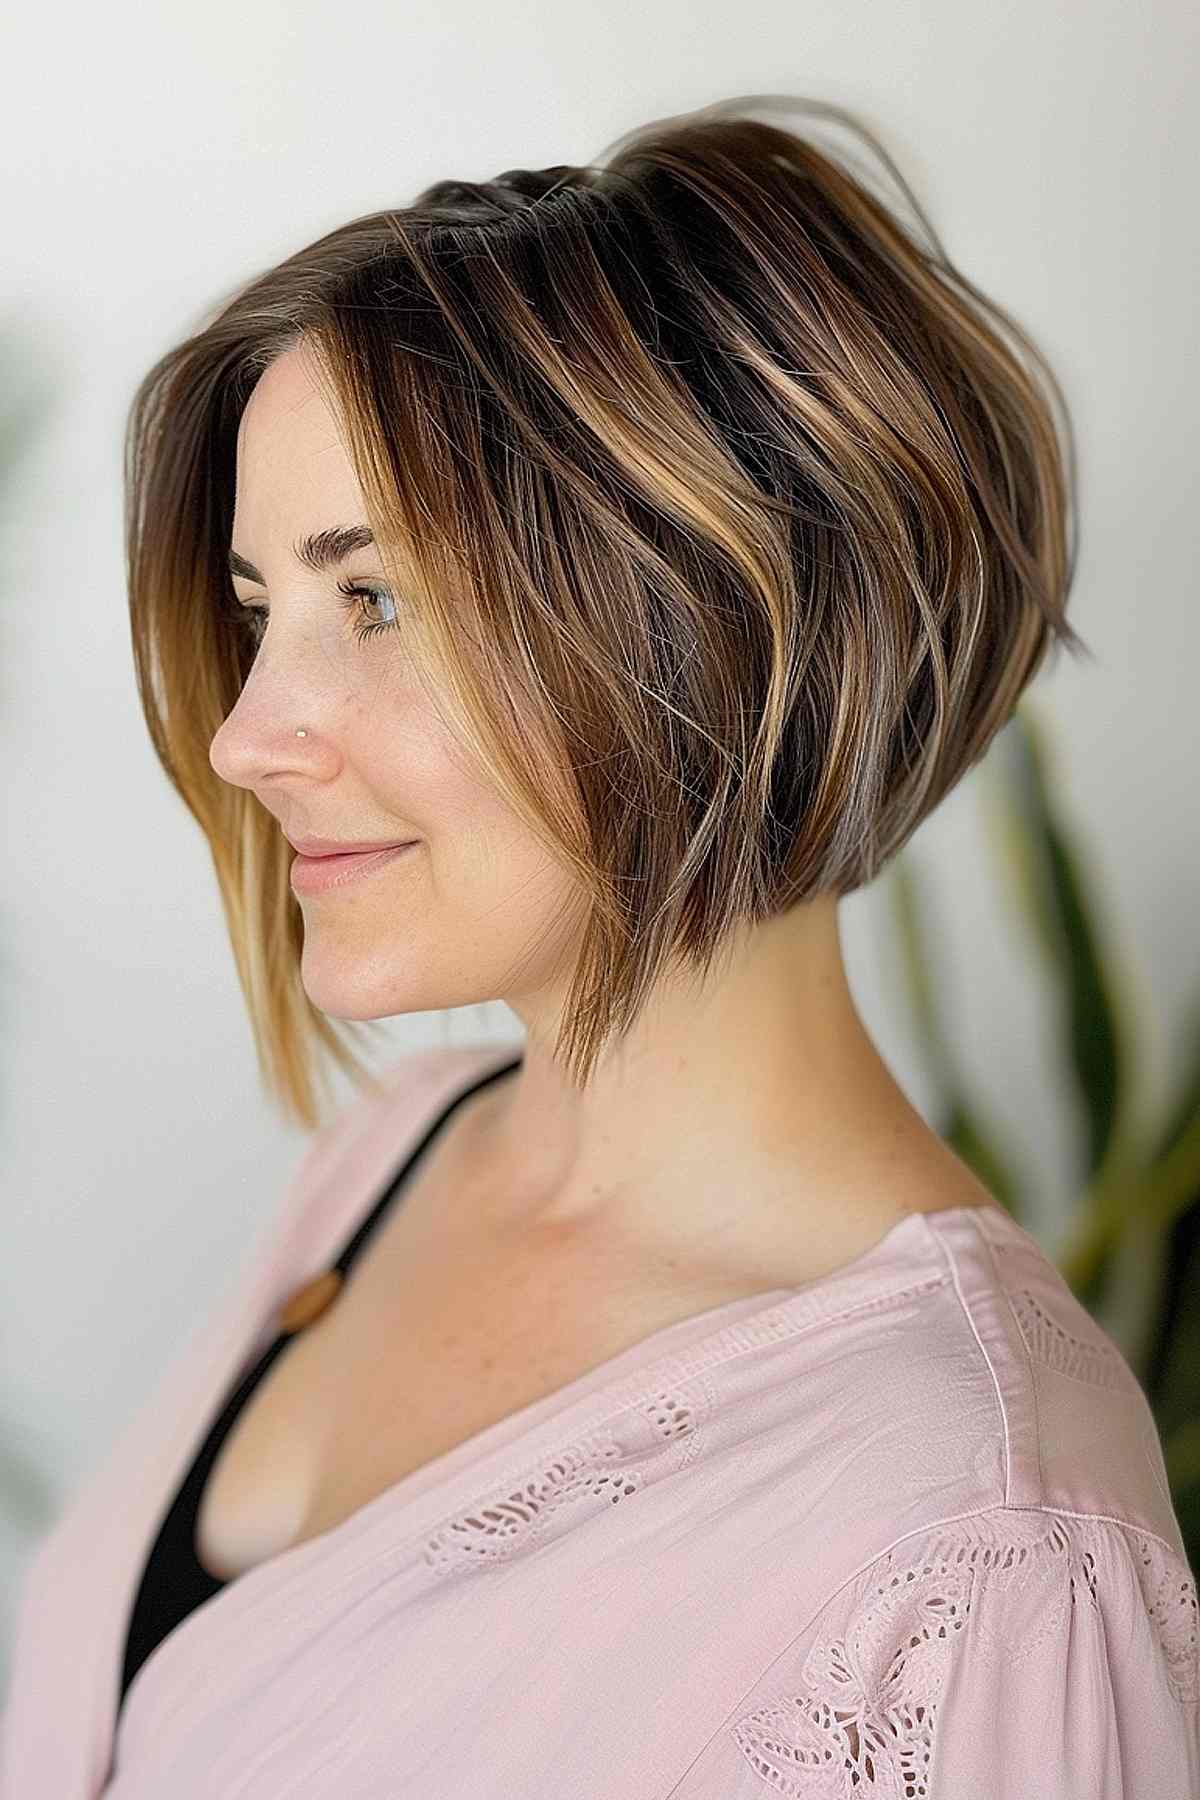 An A-line, chin-length bob with subtle highlights to add depth and dimension.